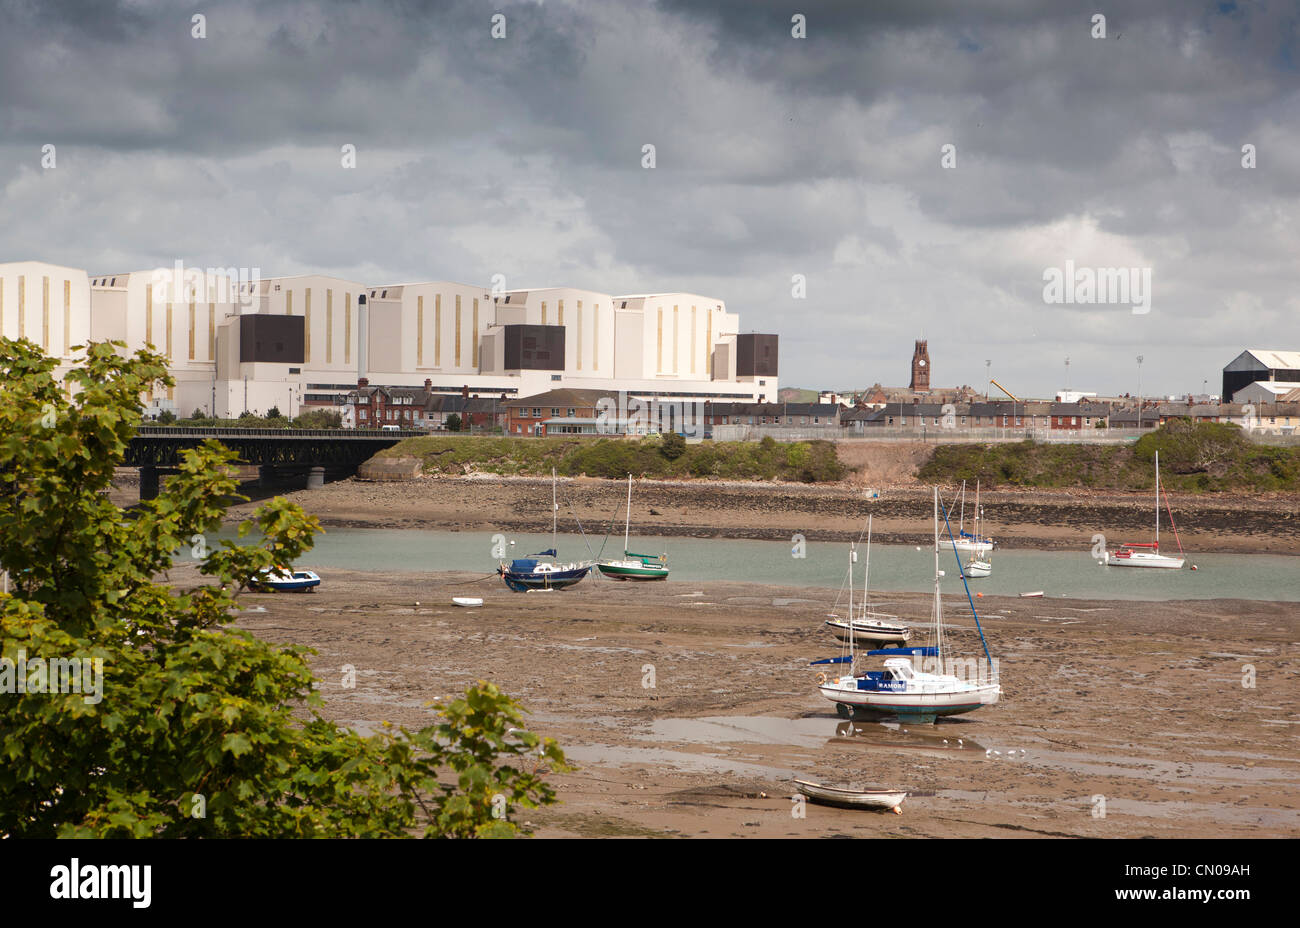 UK, Cumbria, Barrow in Furness, boats moored in Walney Channel at low tide in front of Bae systems shipbuilders Stock Photo